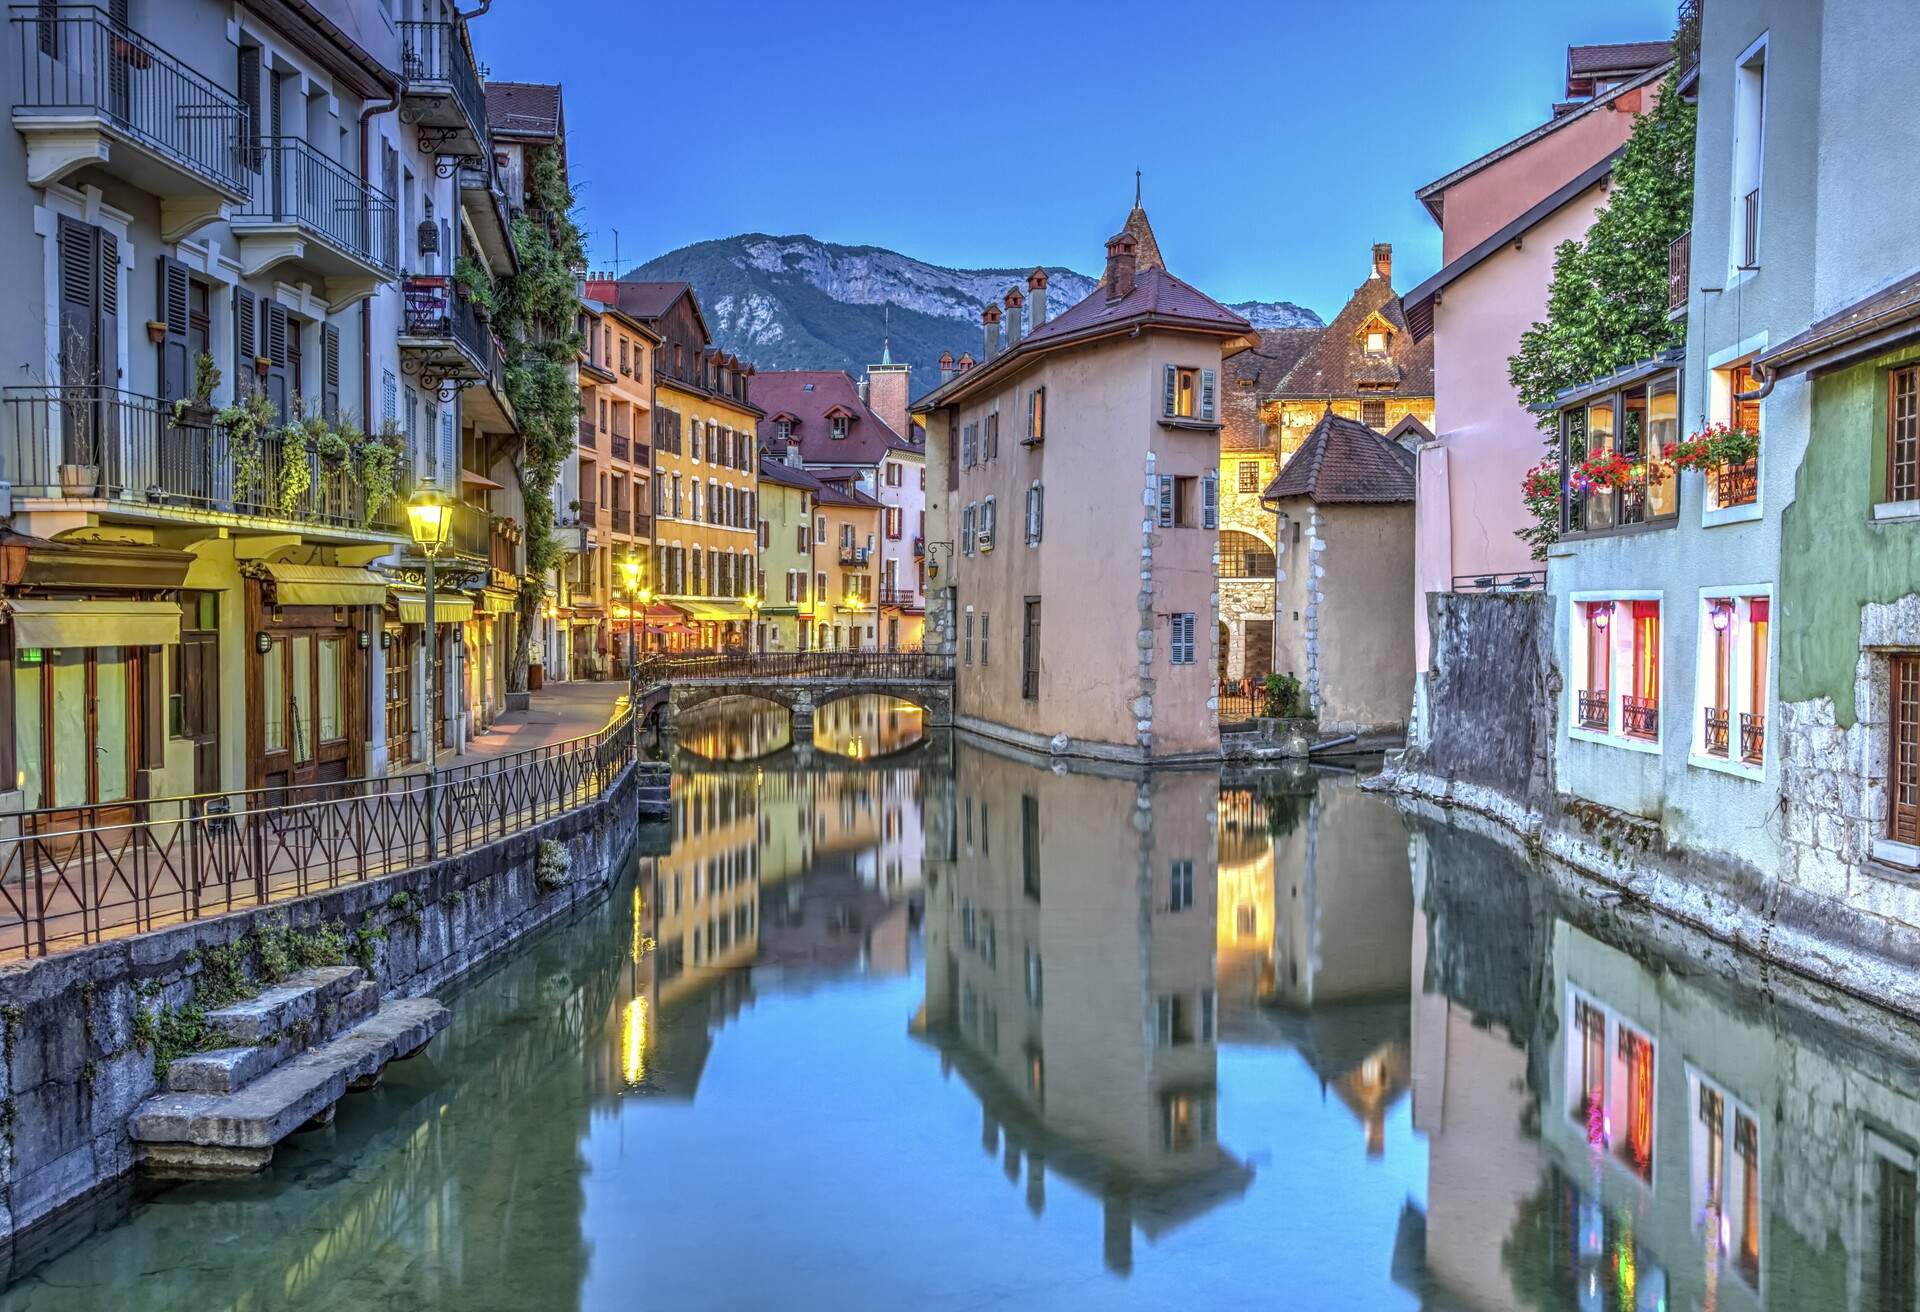 Quai de l'Ile and canal in Annecy old city by night, France, HDR; Shutterstock ID 284833310